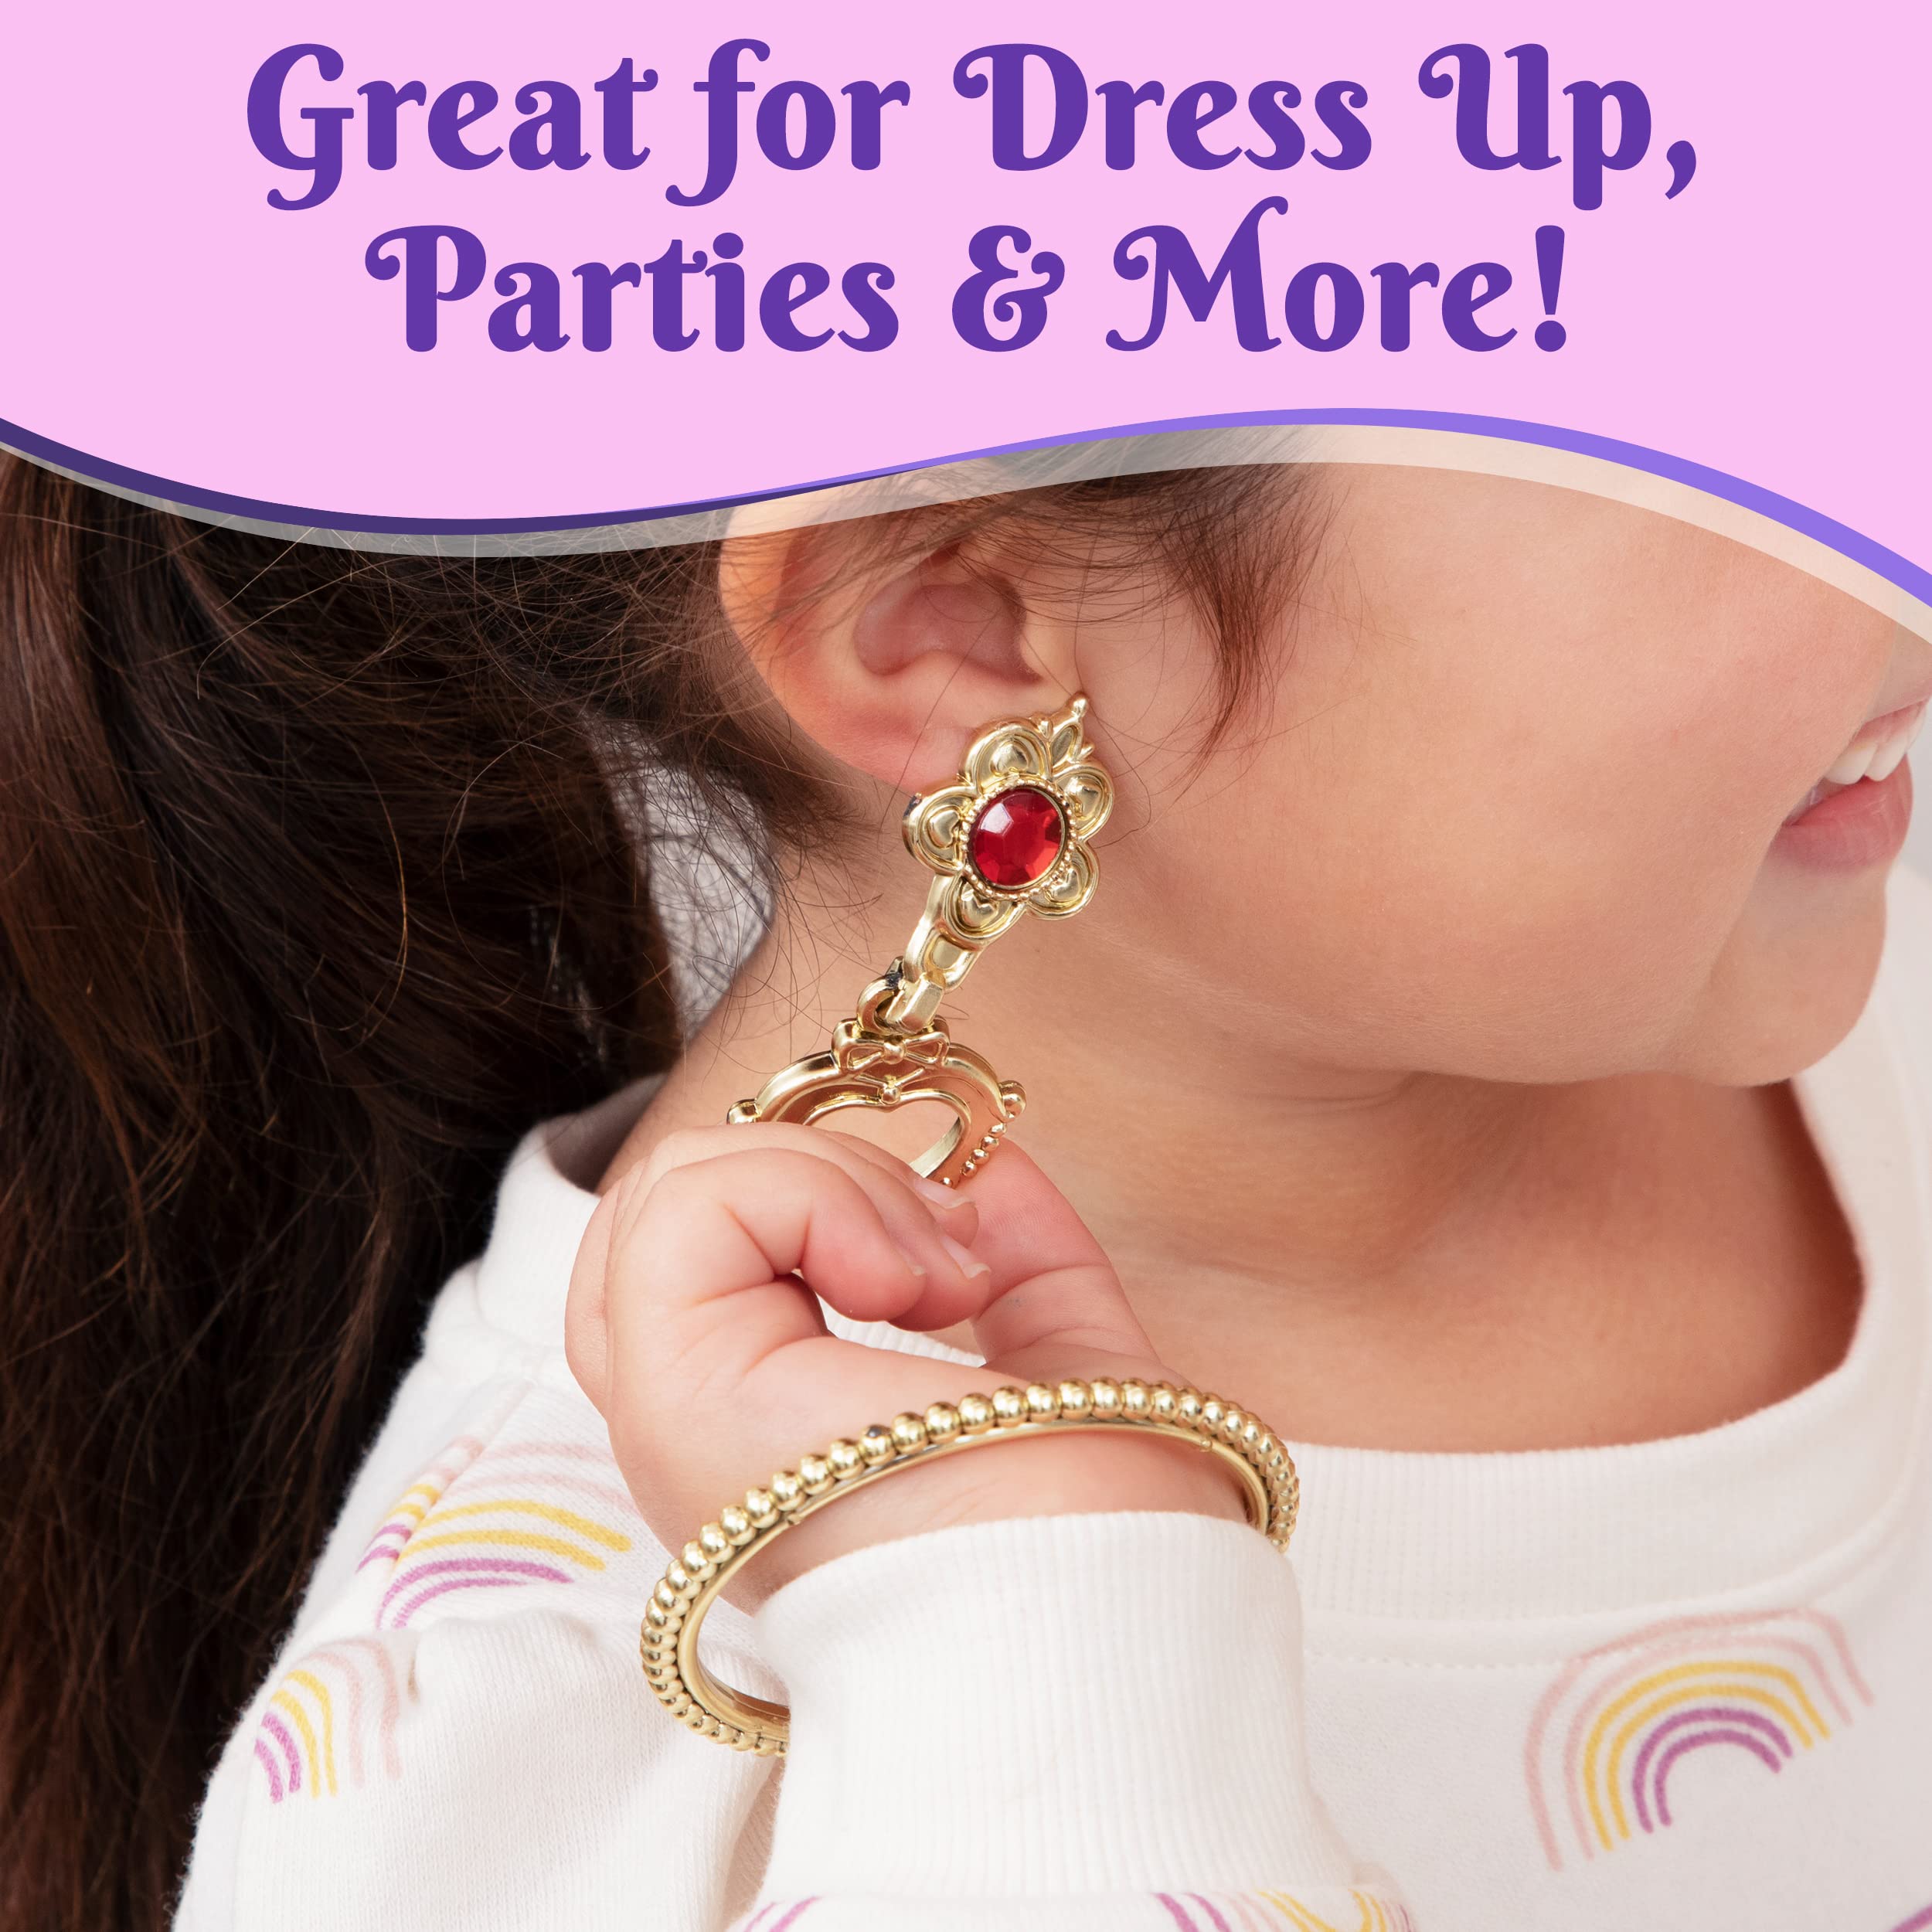 Princess Dress Up Shoes and Jewelry for Little Girls | Toddler Pretend Play Boutique Set | 4 Pairs of Shoes, Earrings, Bracelets & Rings | Gift Toy Set for 2 3 4 5 6 Year Old Girl | Gifts for Girls